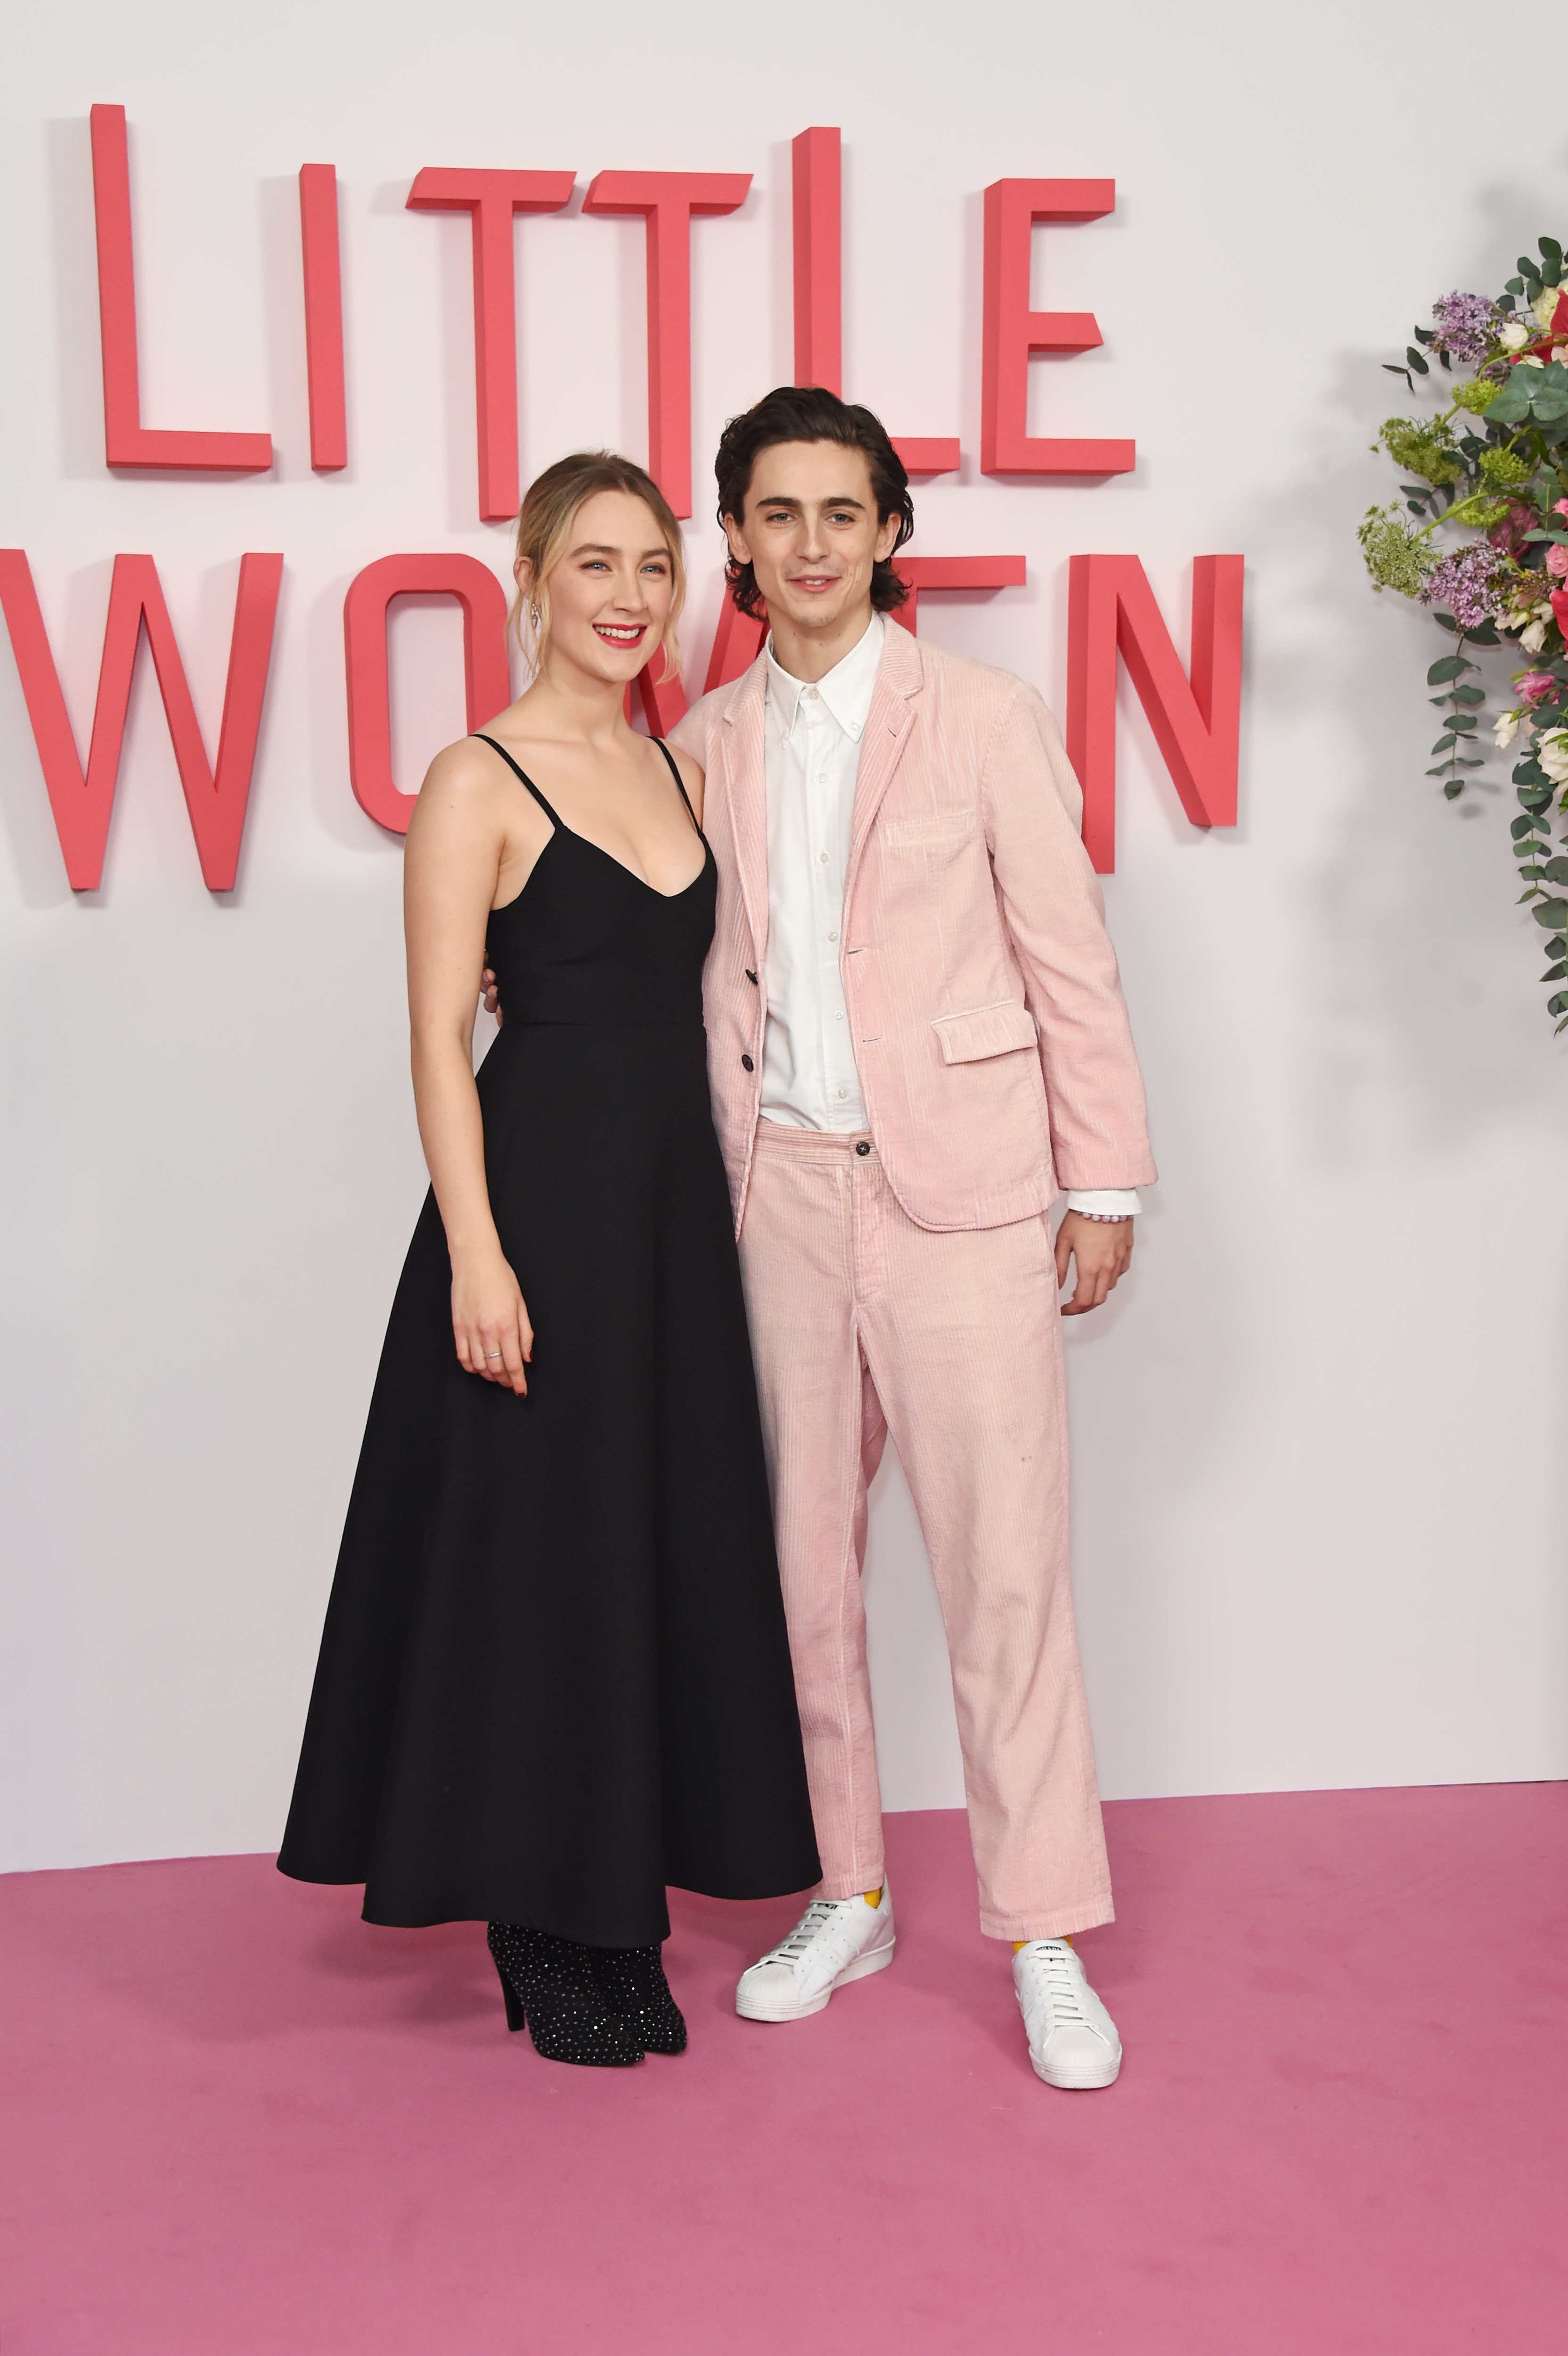 Saoirse Ronan and Timothée Chalamet posed for for "Little Women" photocall at The Soho Hotel London on December 16, 2019, in London, England. | Source: Getty Images